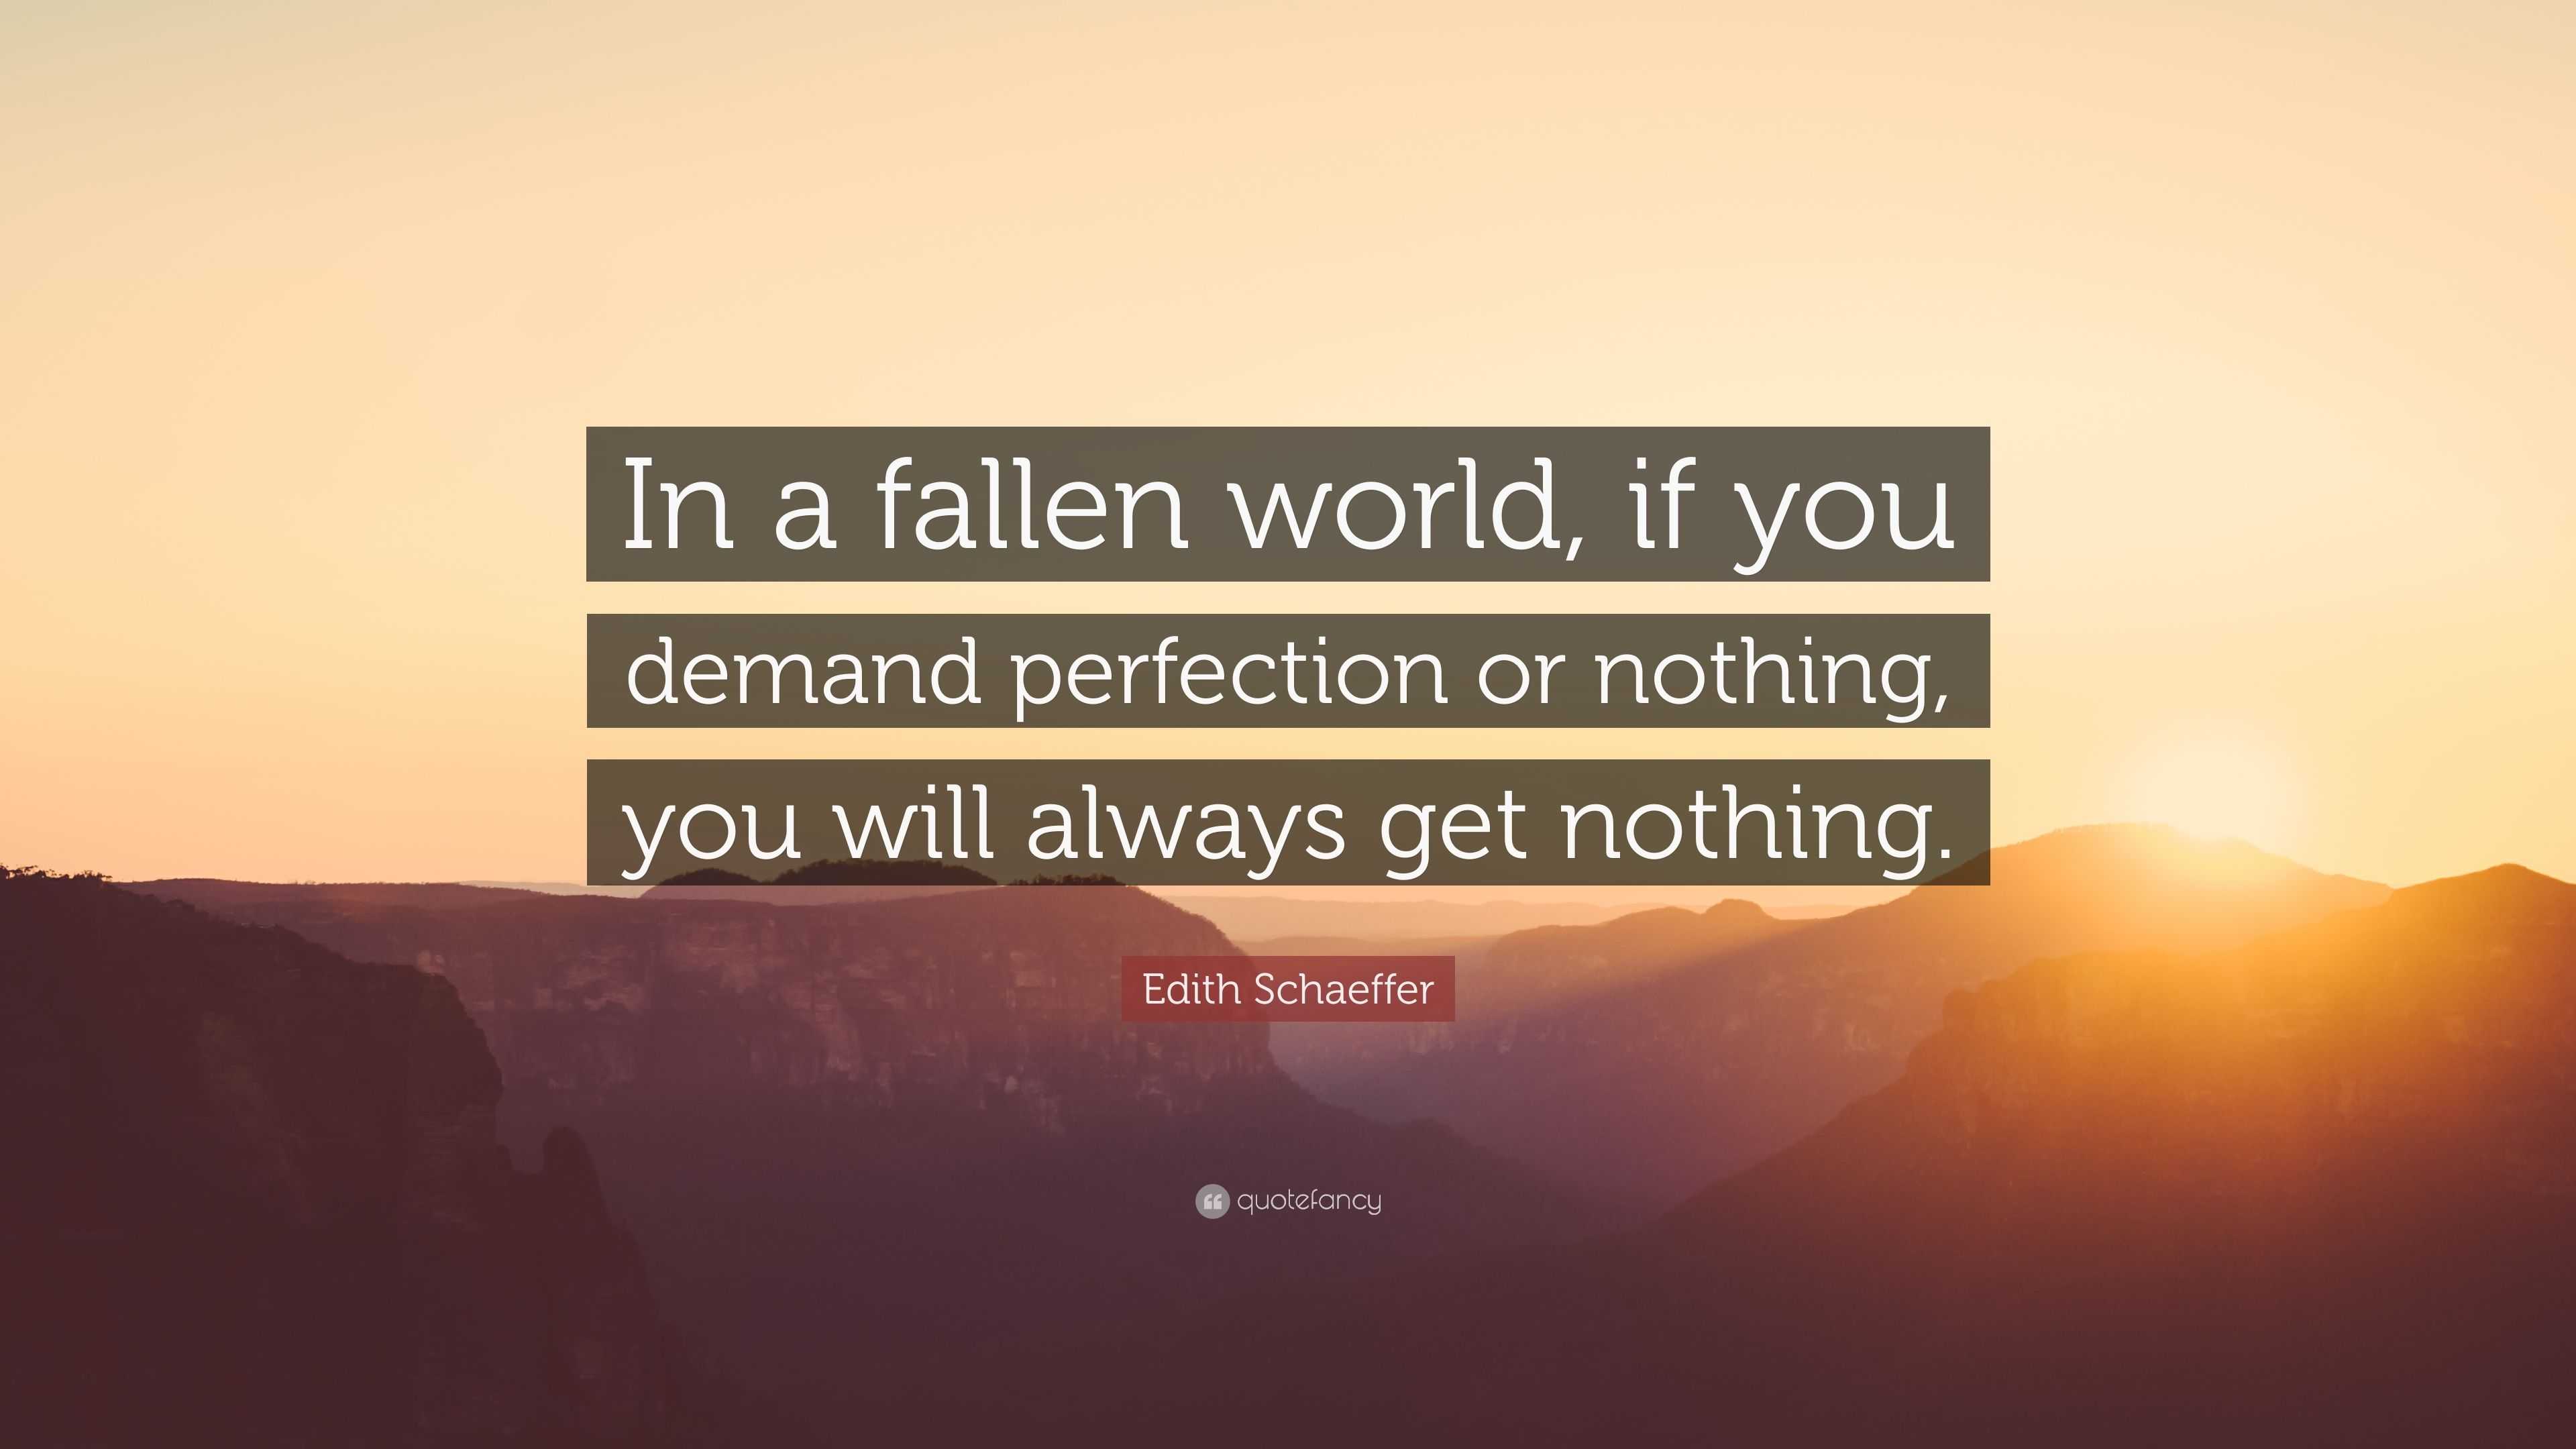 Edith Schaeffer Quote “in A Fallen World If You Demand Perfection Or Nothing You Will Always 